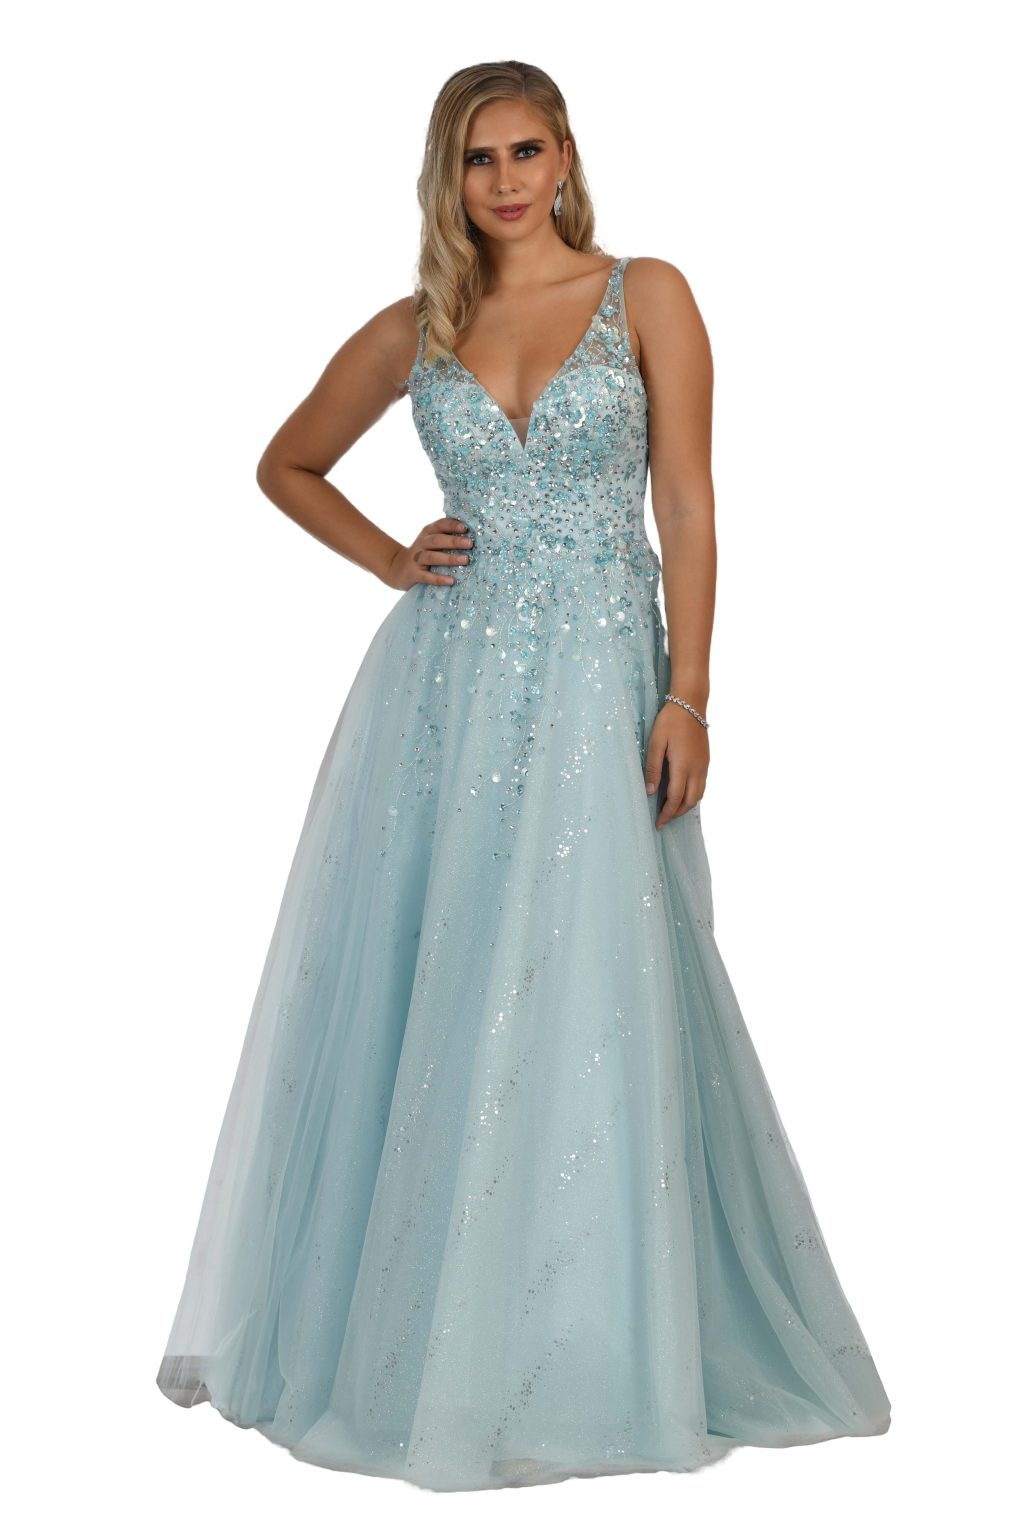 Full length dress with full skirt. AF79561 - Catherines of Partick